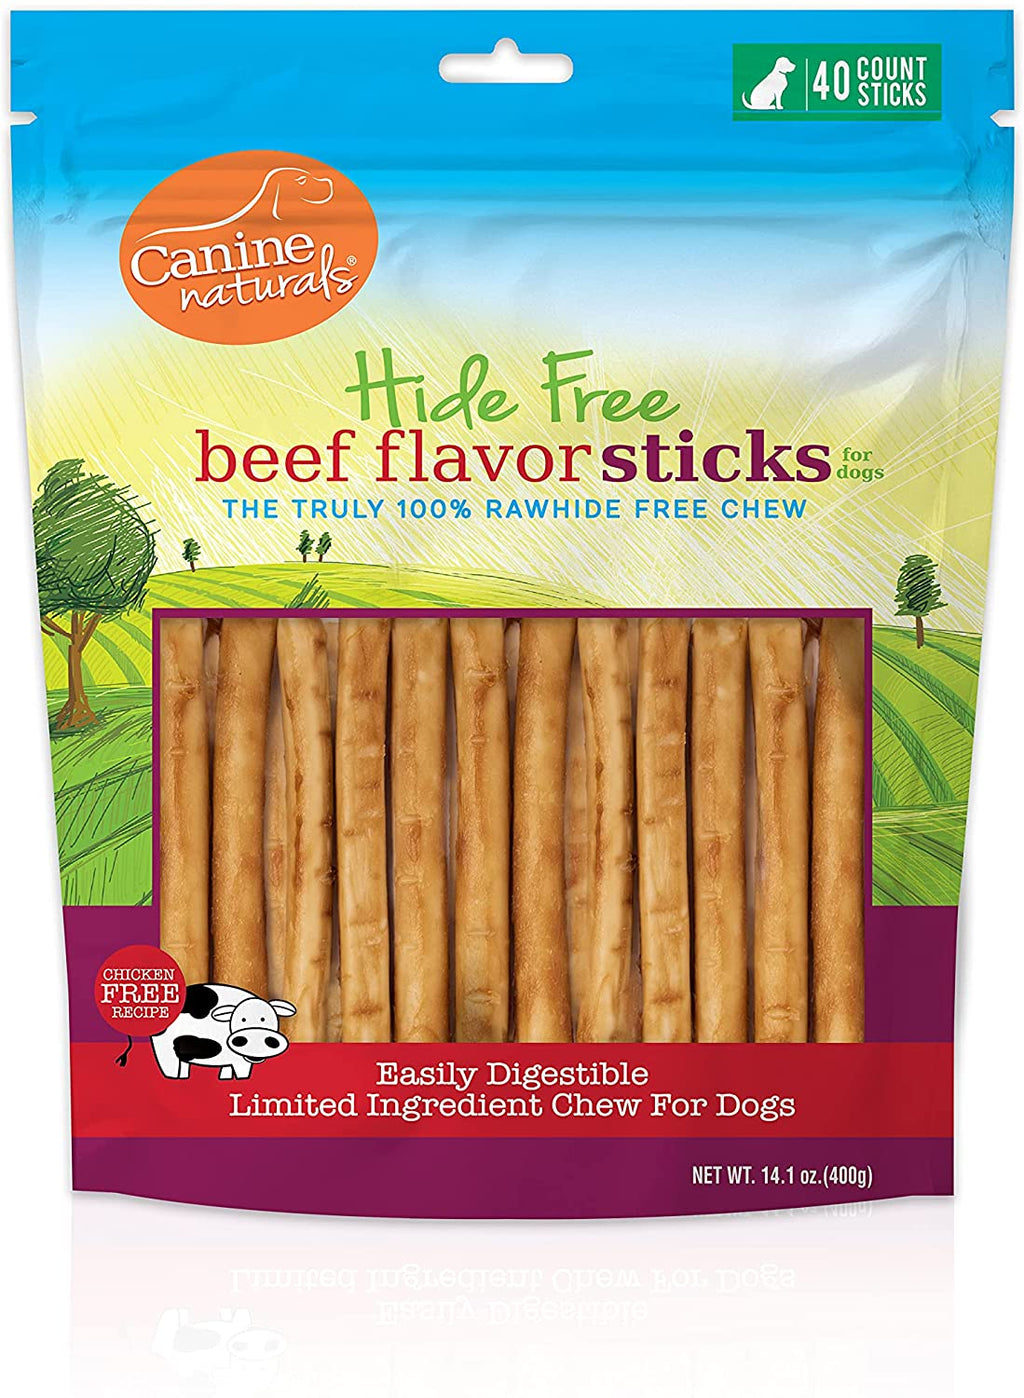 Canine Naturals Hide-Free Beef Rolls Natural Dog Chews- 5 Inch - 14.1 oz - 40 Count  